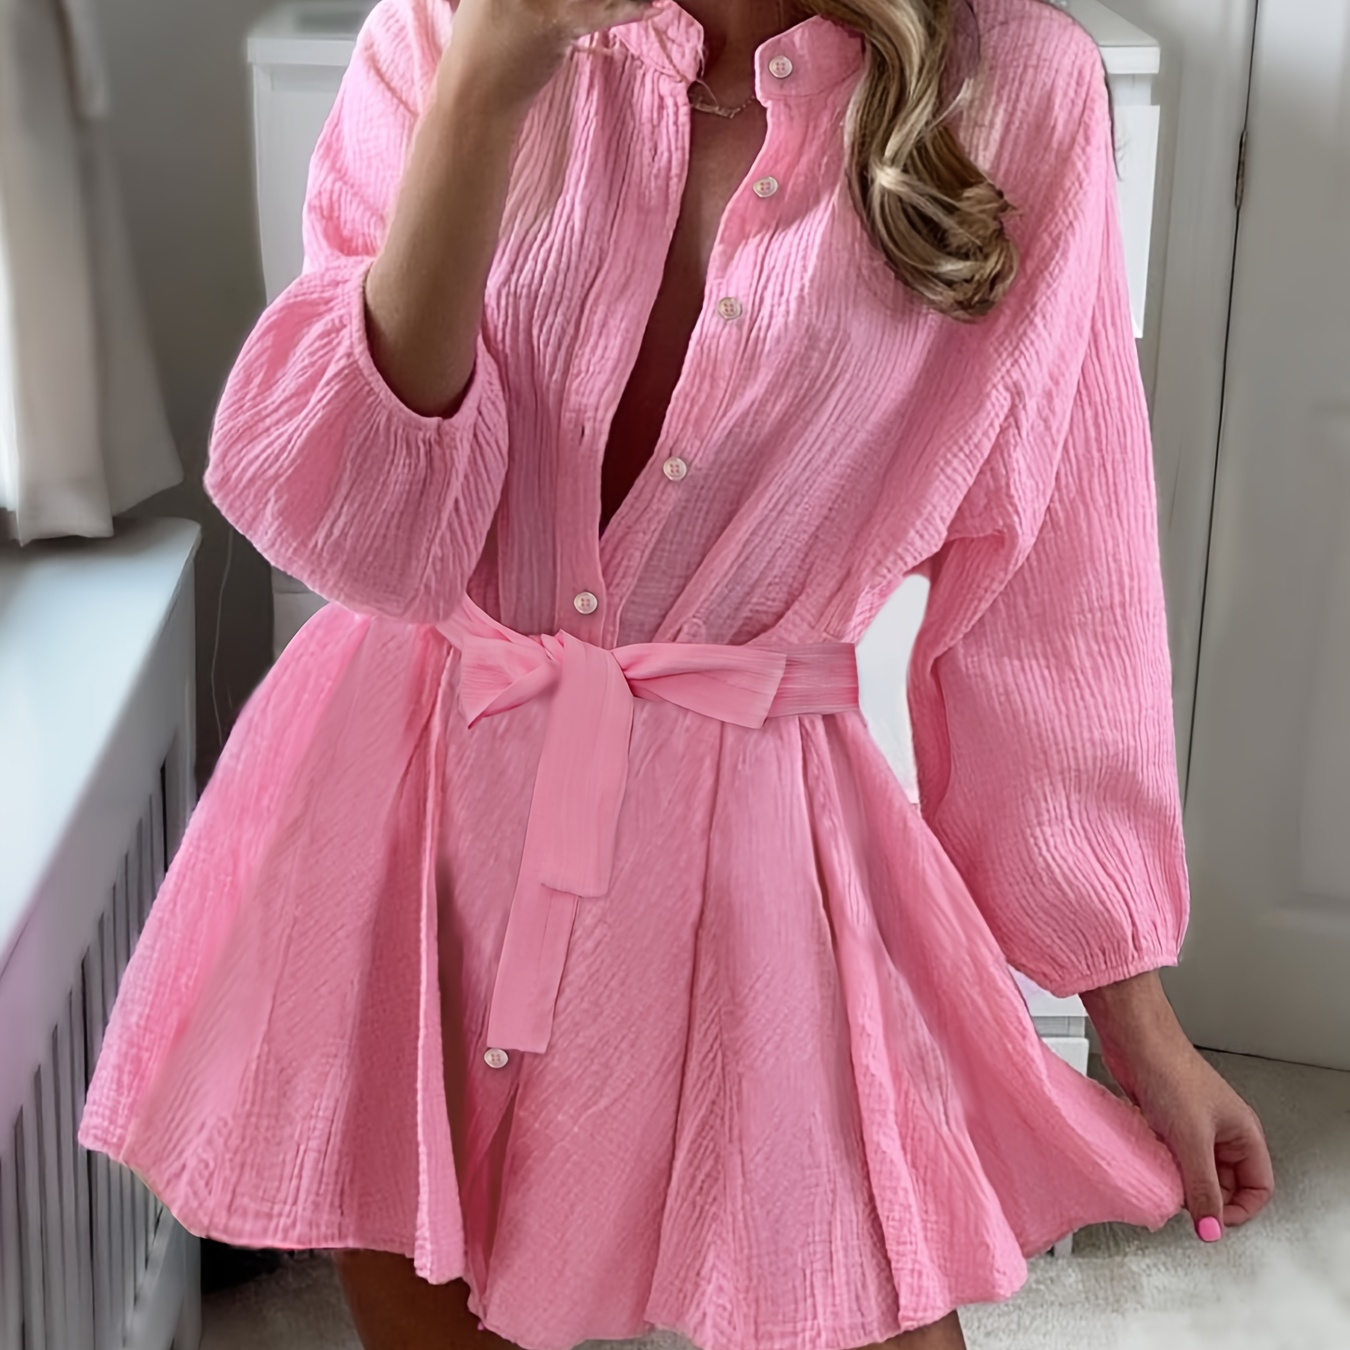 

Texture Button Front Tie Waist Dress, Casual Long Sleeve Dress For Spring & Summer, Women's Clothing